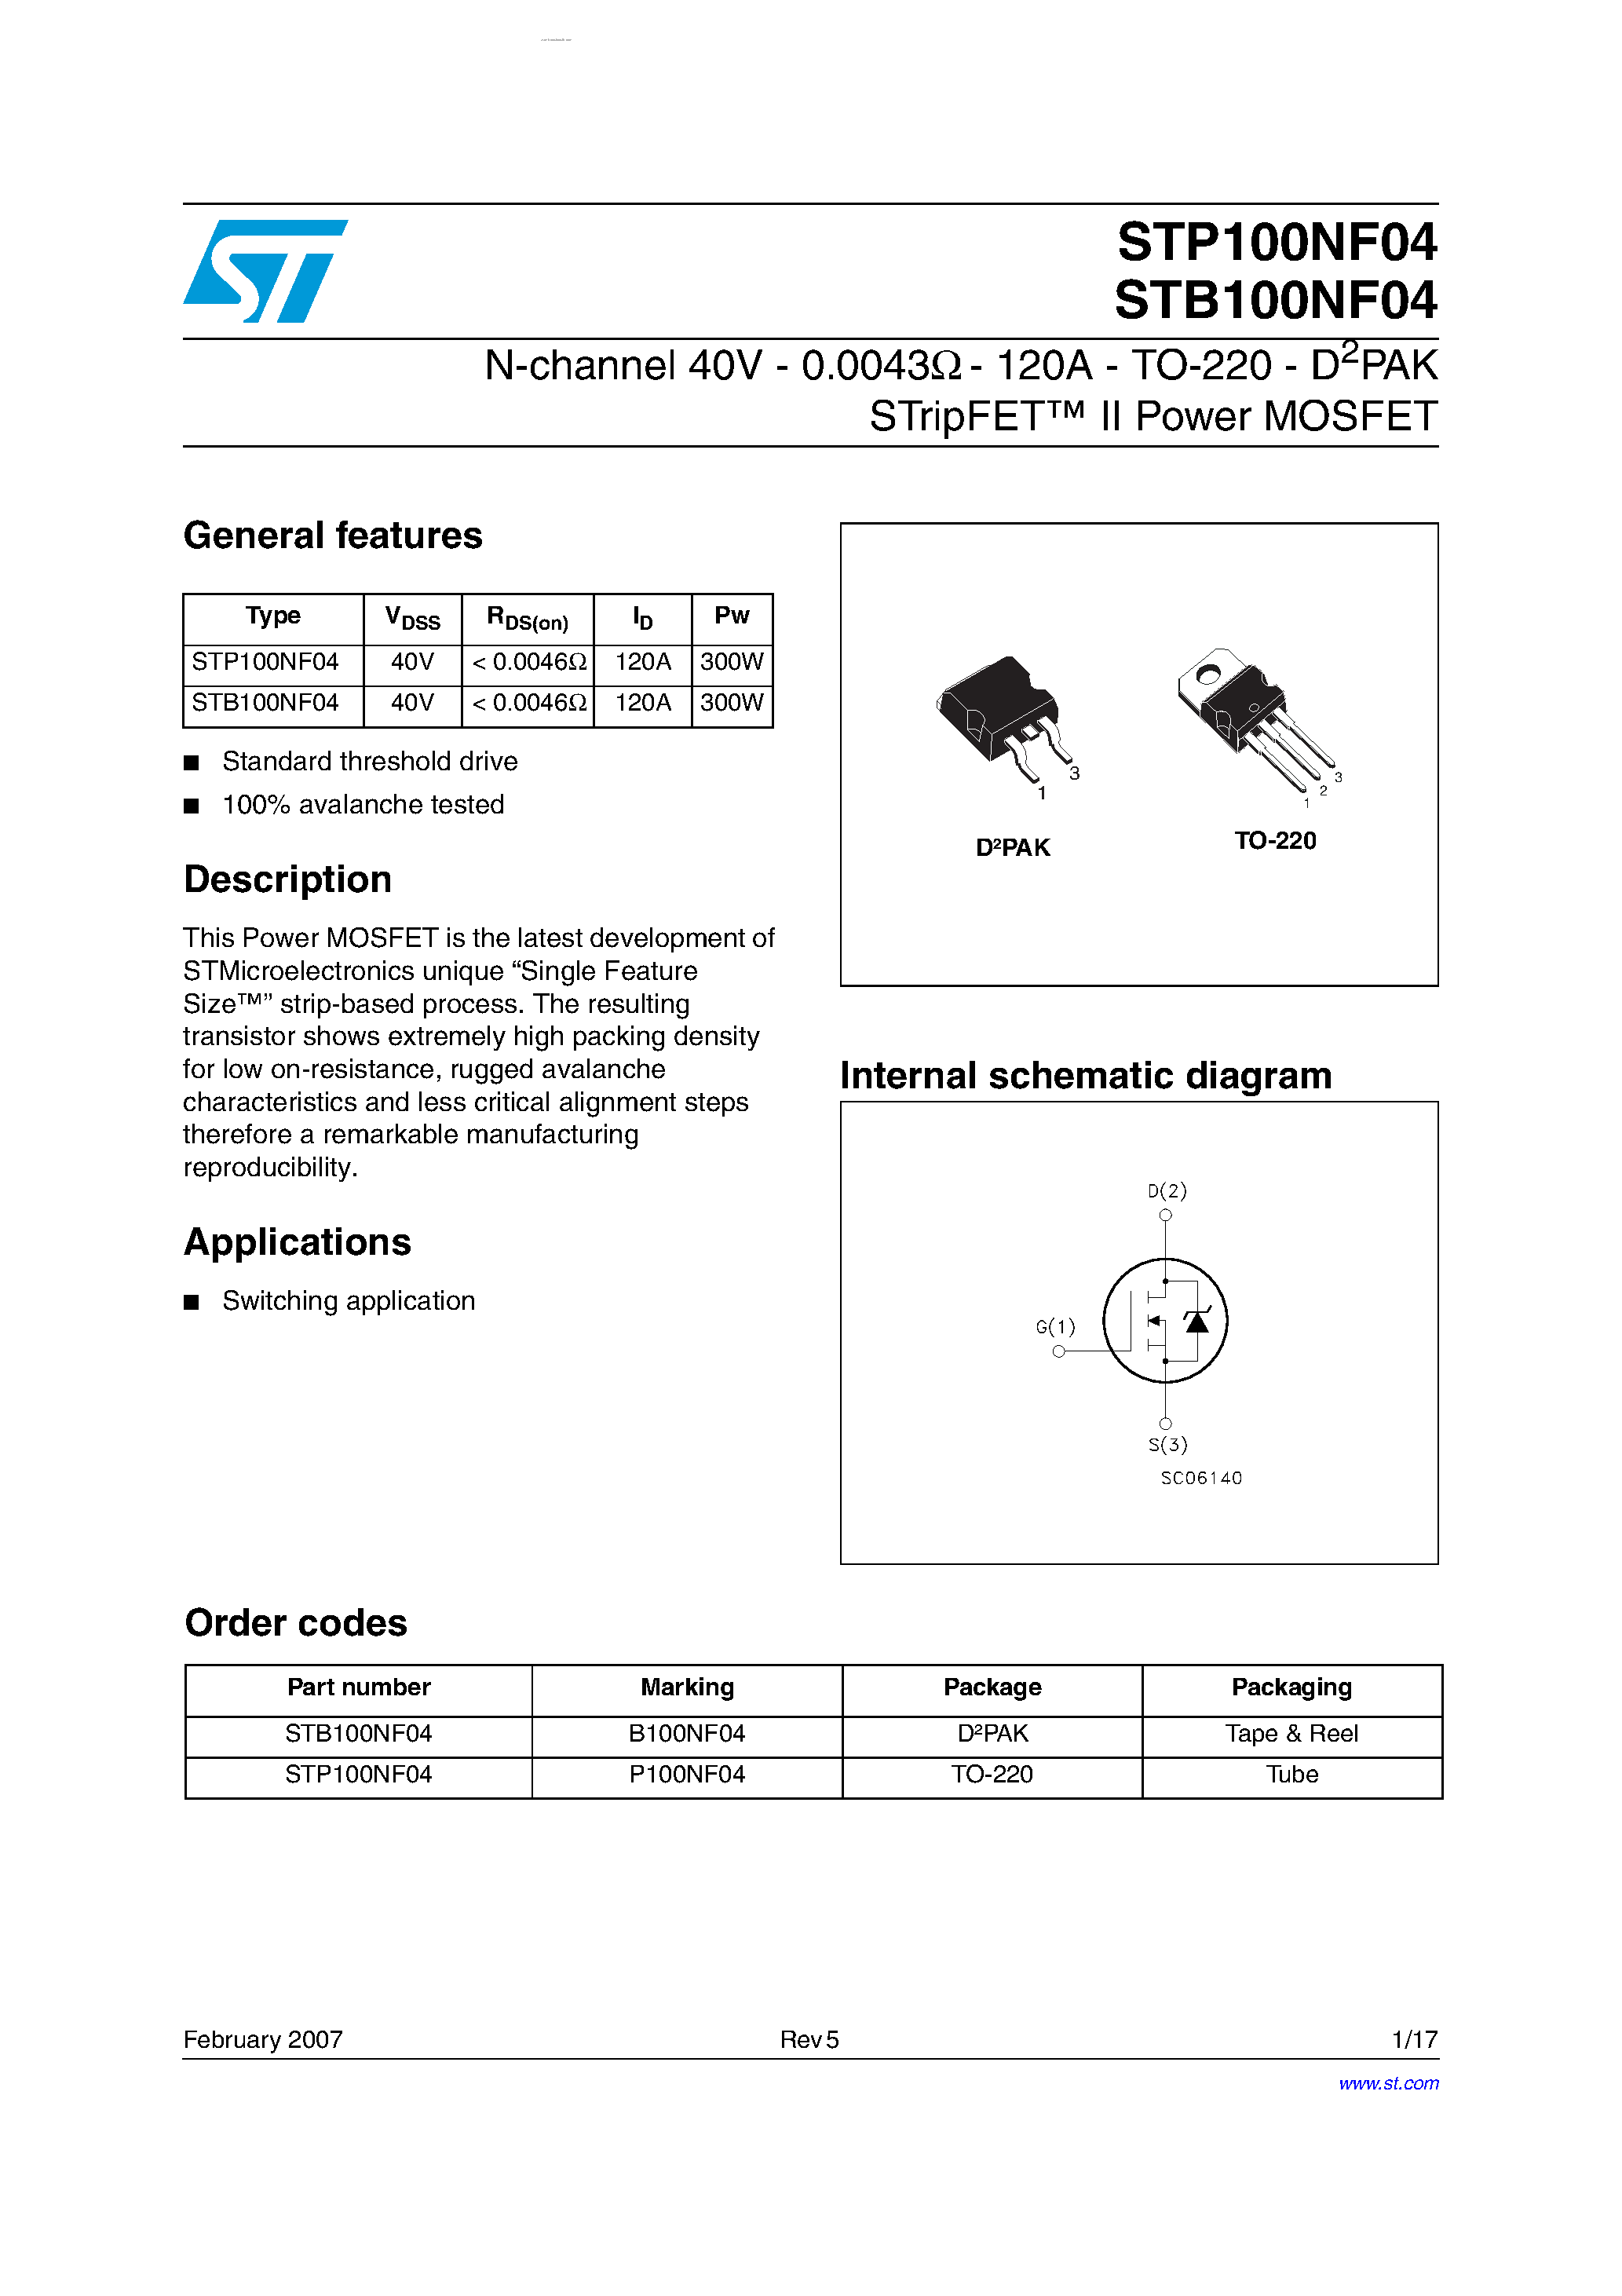 Даташит STP100NF04 - N-channel Power MOSFET страница 1